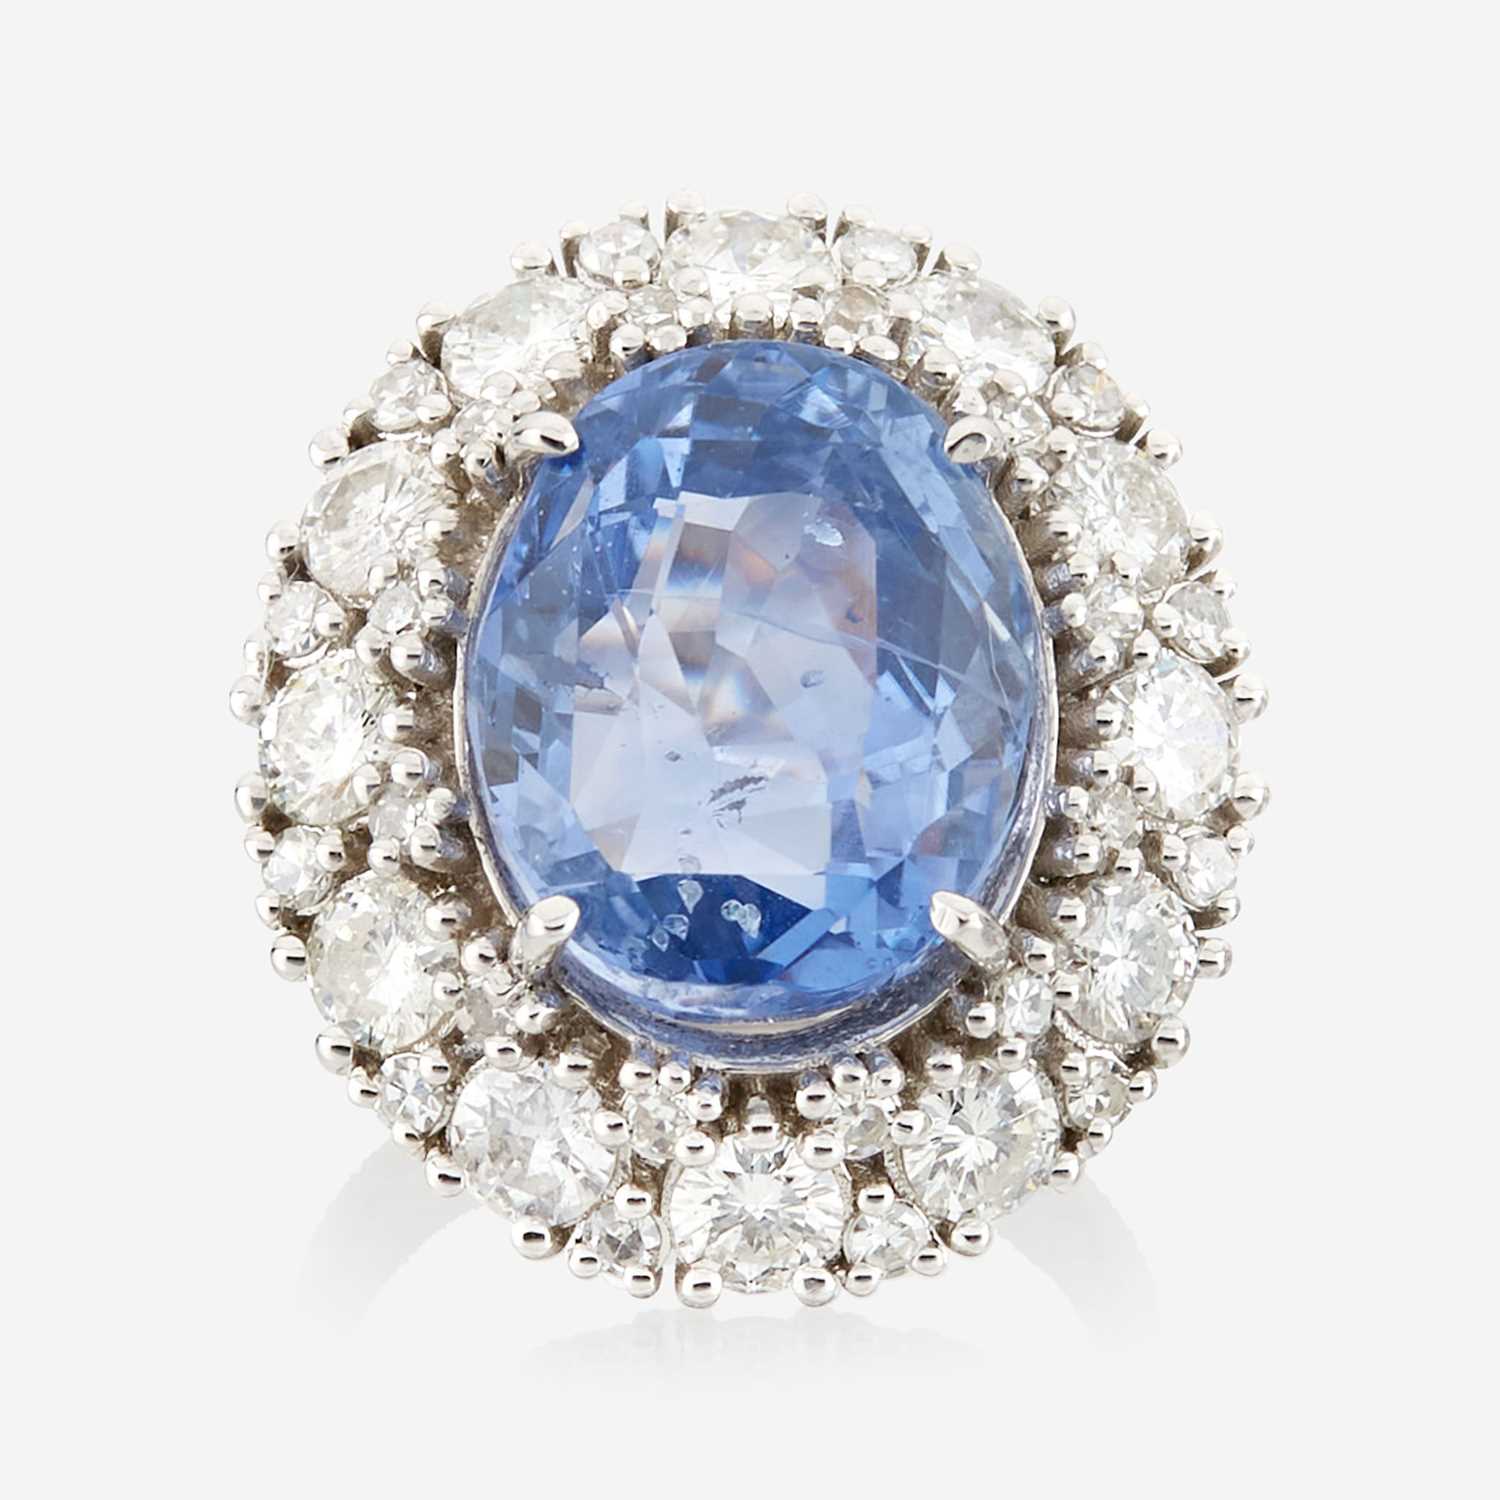 Lot 44 - A sapphire, diamond, and white gold ring